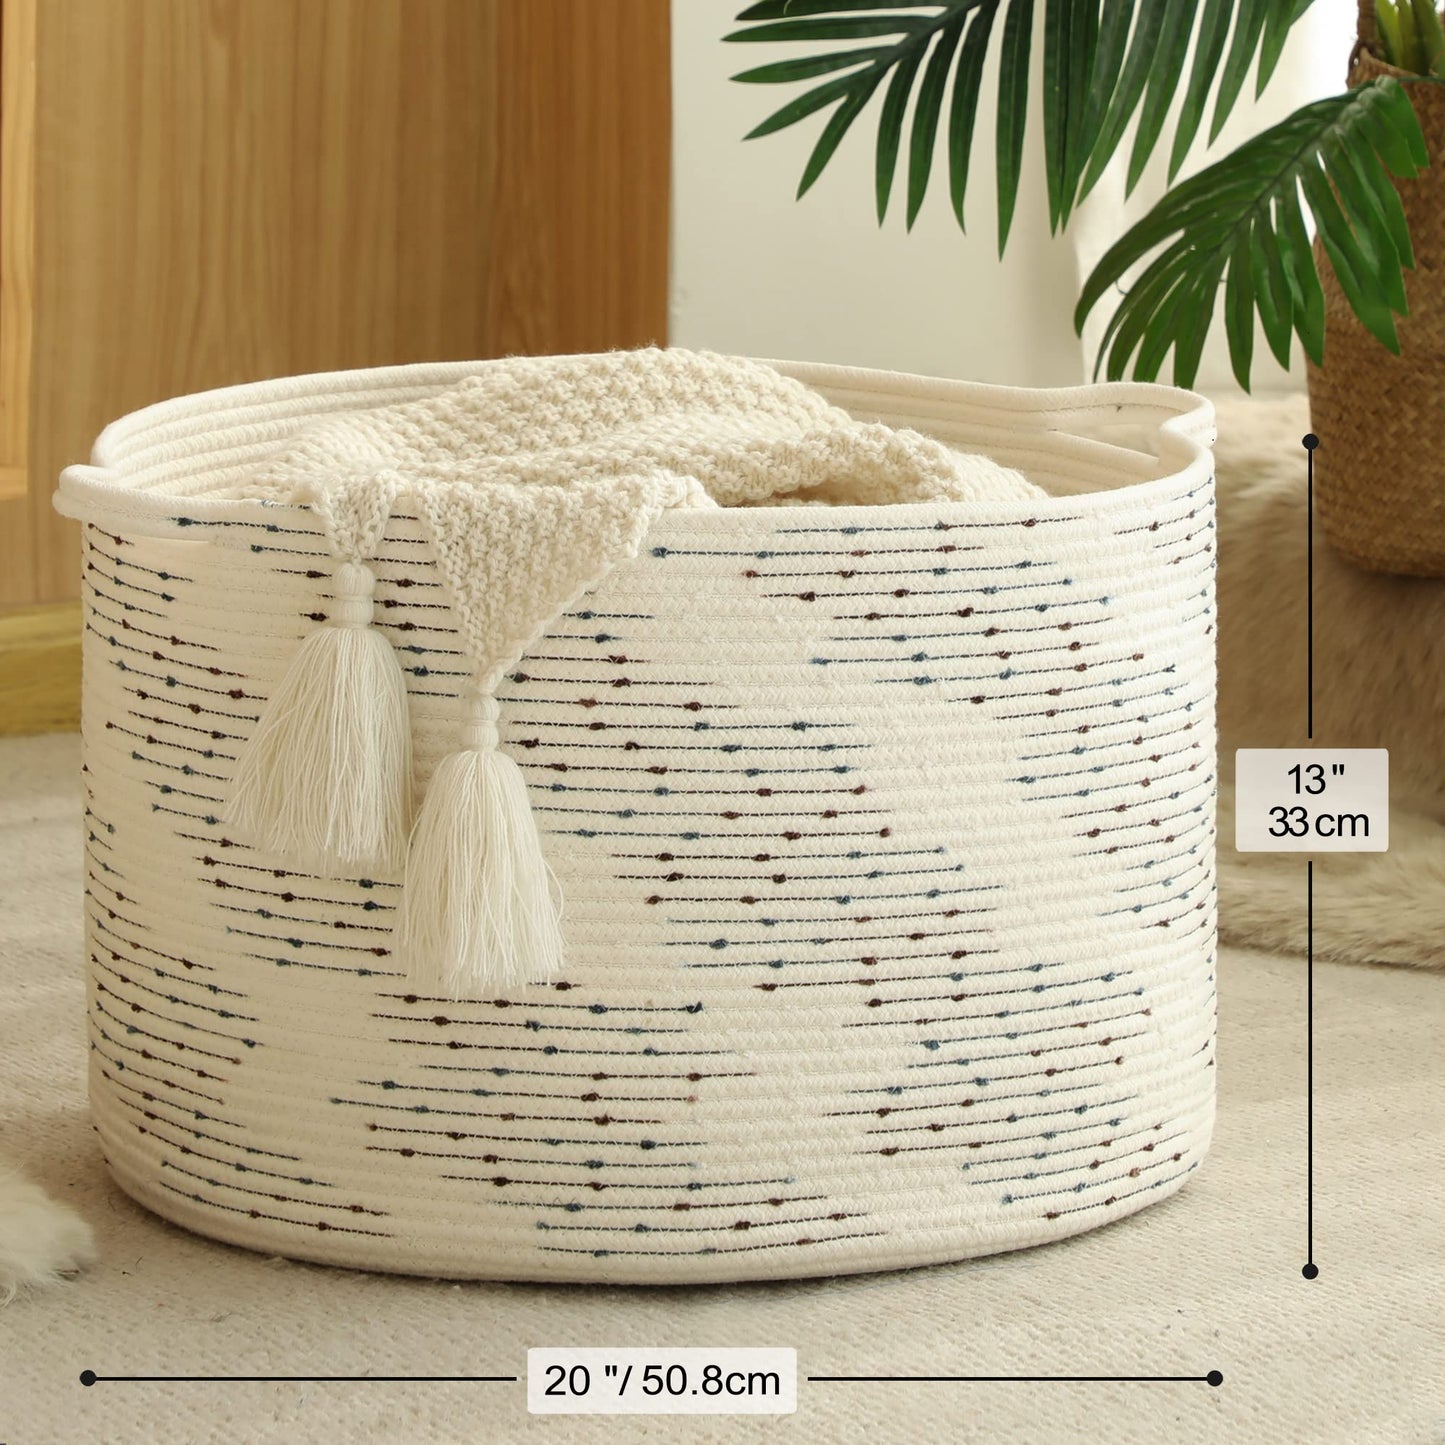 KAKAMAY Large Blanket Basket (20"x13"),Woven Baskets for storage Baby Laundry Hamper，Cotton Rope Blanket Basket for Living Room, Laundry, Nursery, Pillows, Off White with Blue & Brown Dotted Pattern